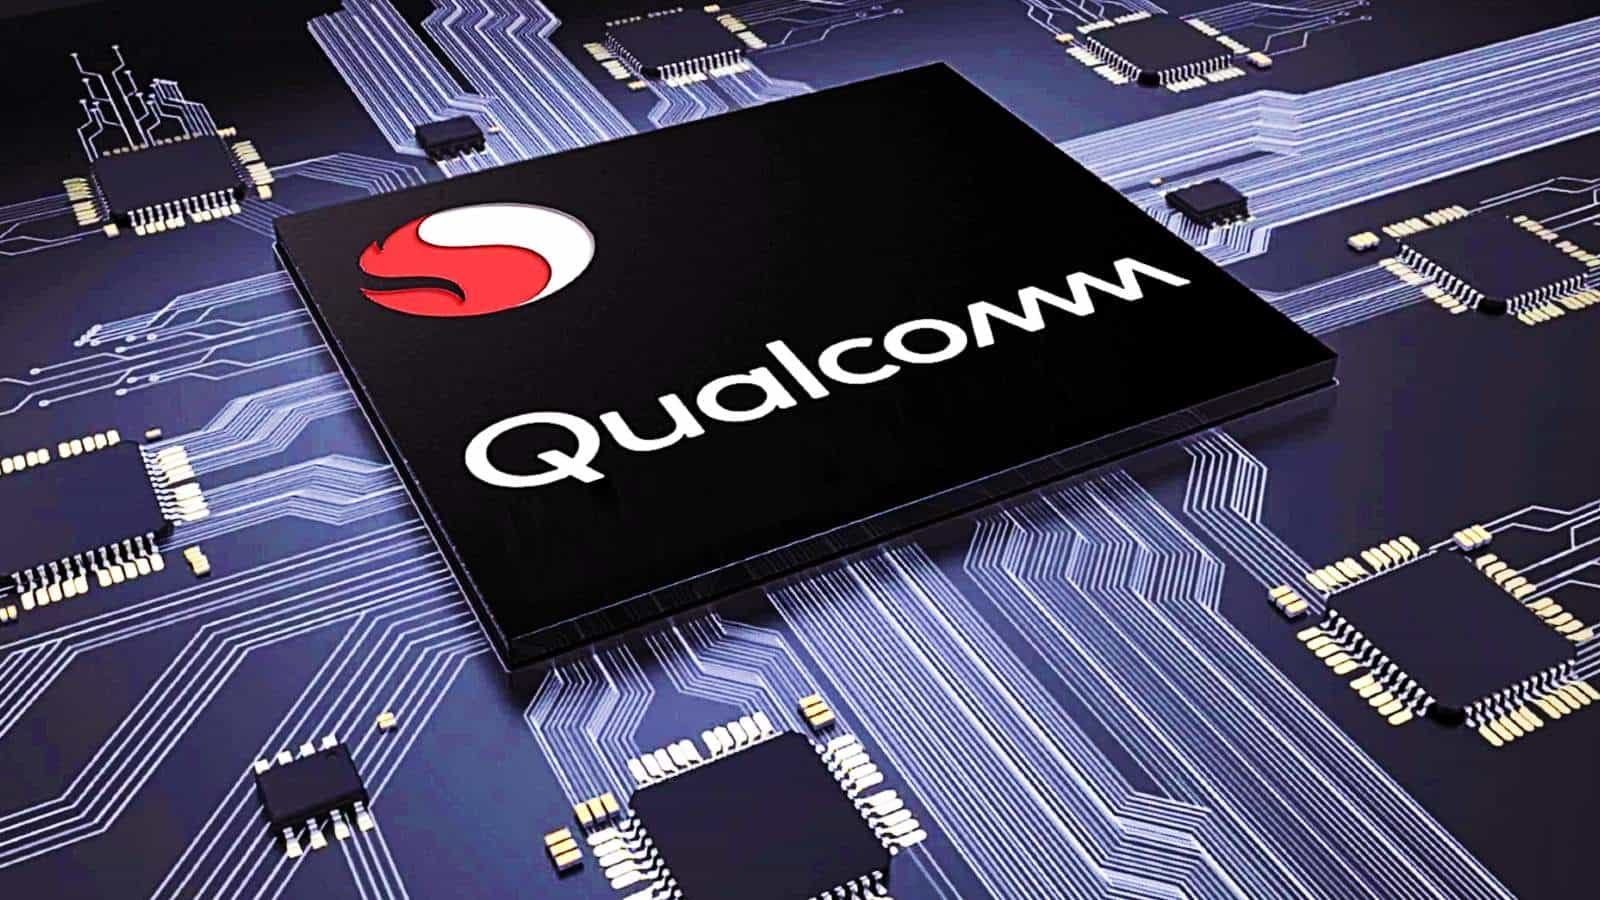 Upcoming Qualcomm Snapdragon 895 to use Samsung's 4nm node while Snadragon 895+ to use TSMC's